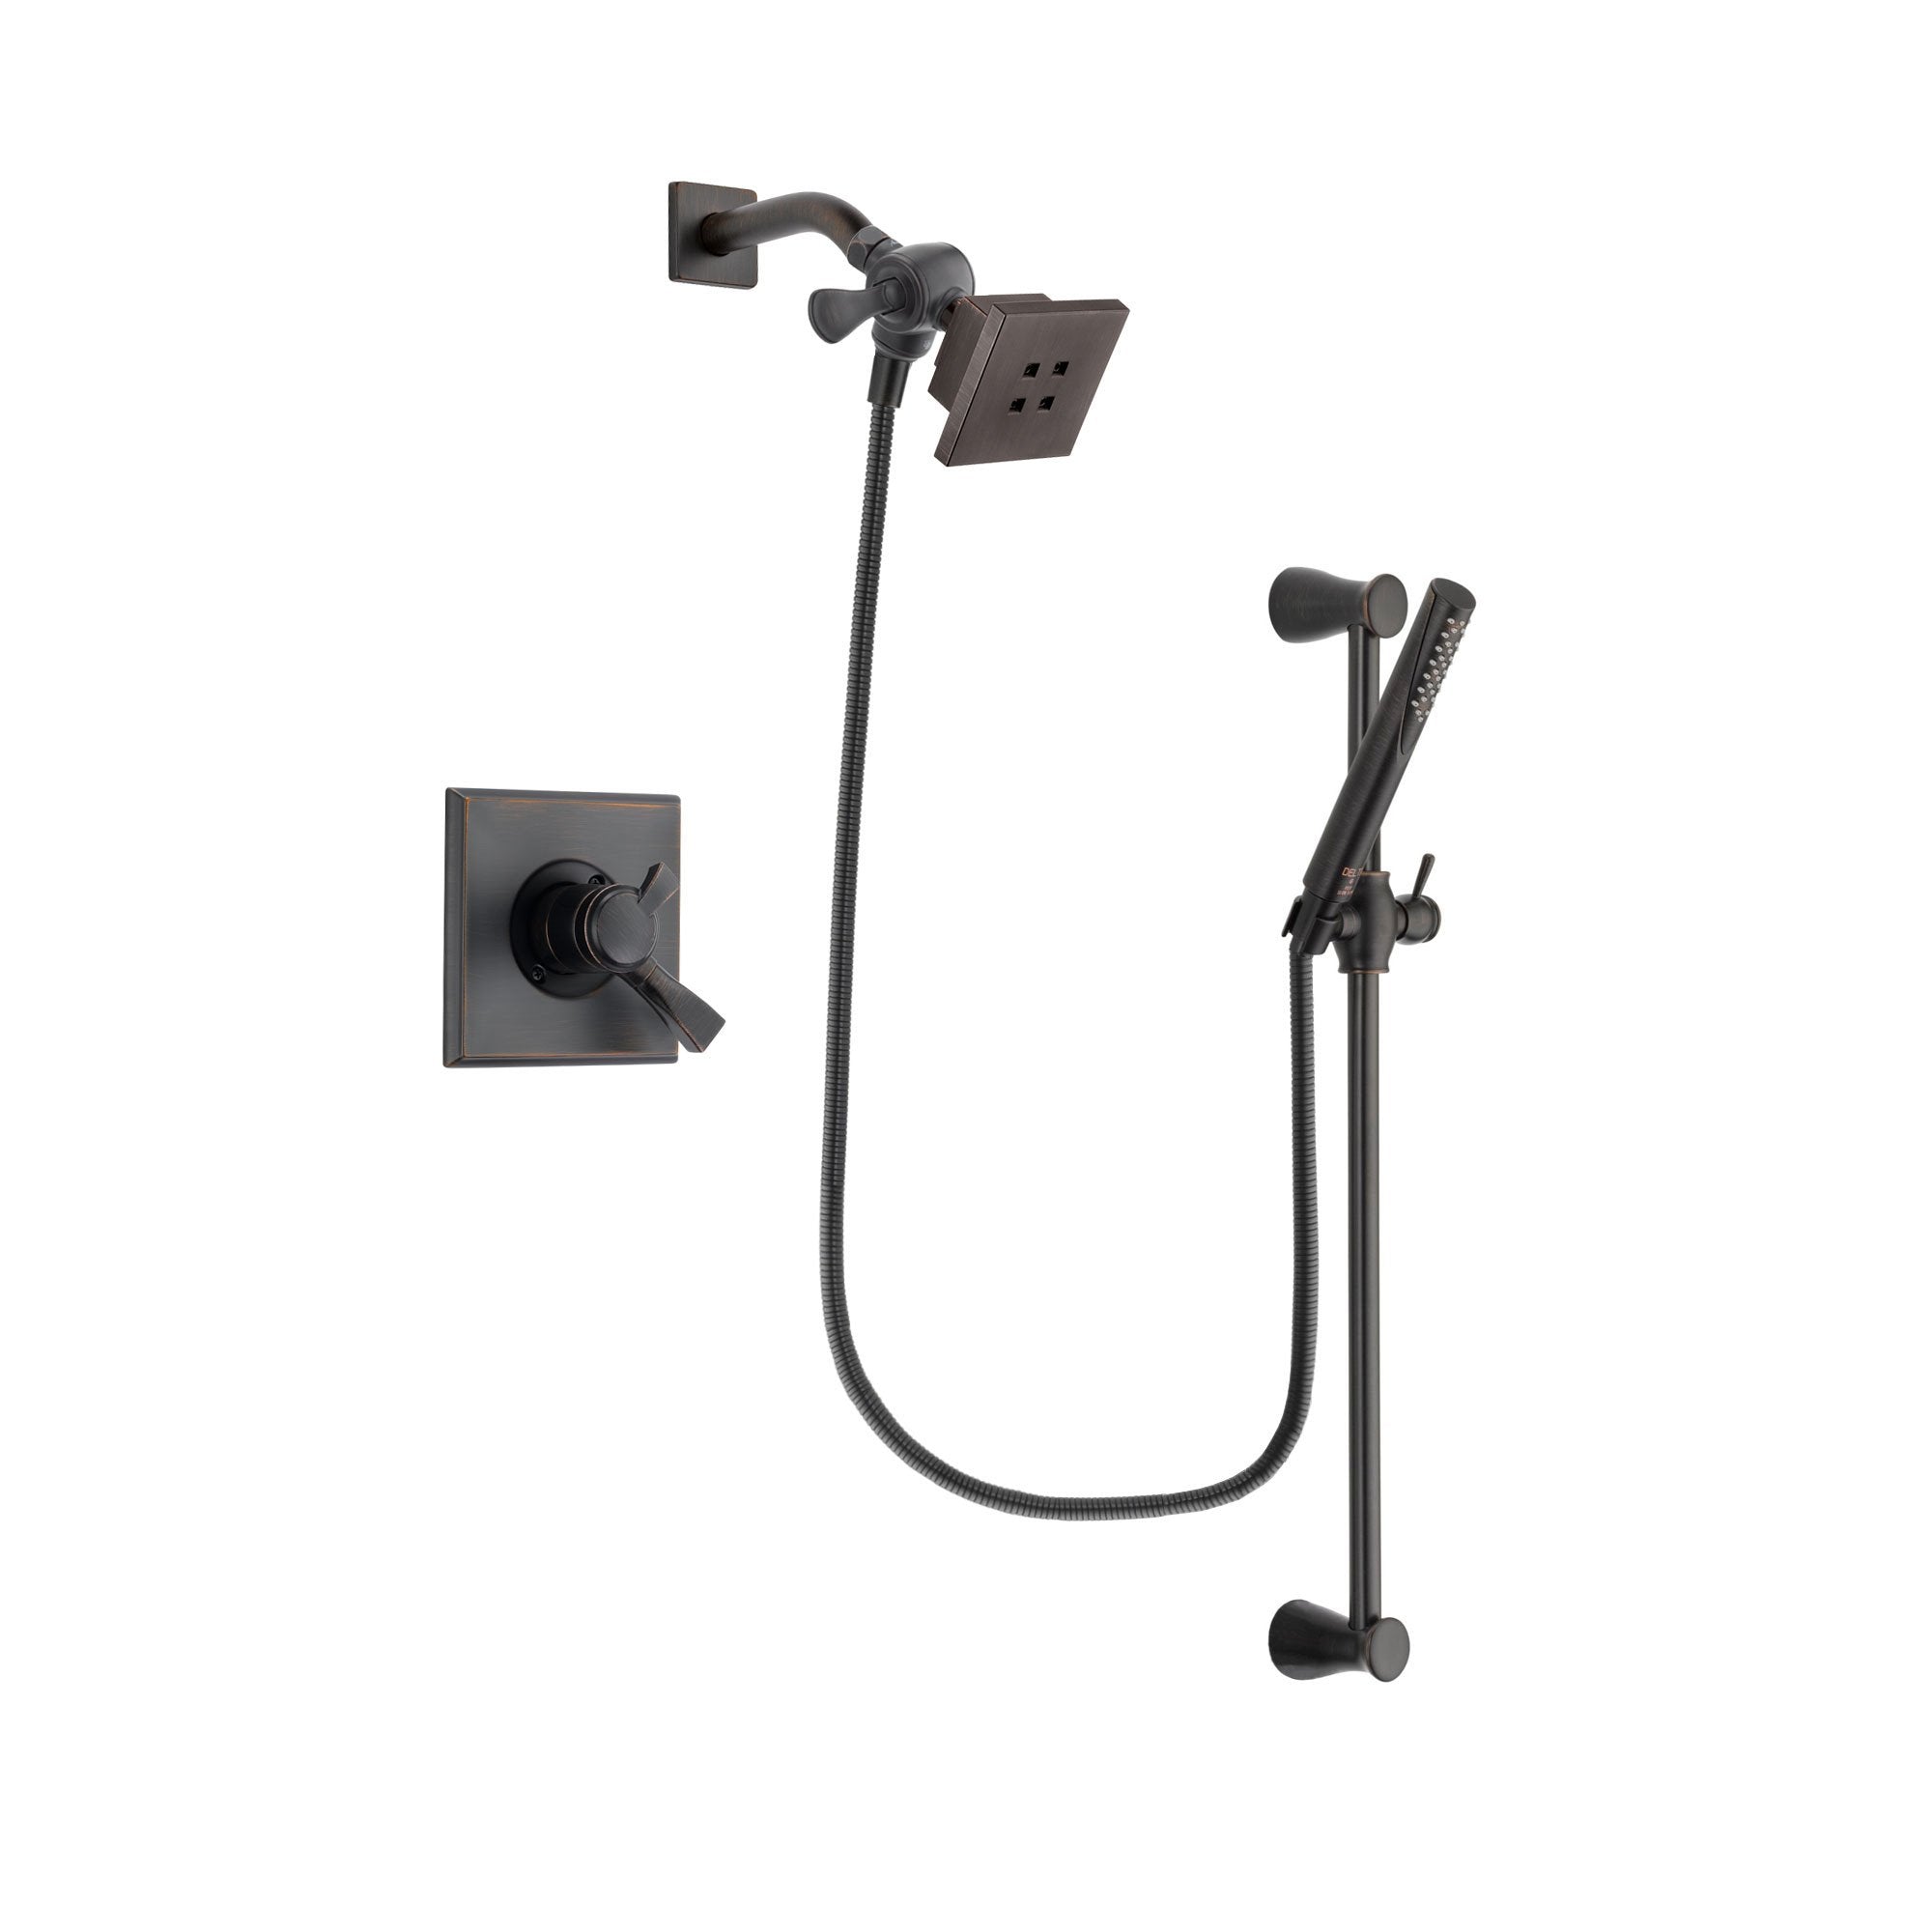 Delta Dryden Venetian Bronze Finish Dual Control Shower Faucet System Package with Square Showerhead and Modern Hand Shower with Slide Bar Includes Rough-in Valve DSP3146V